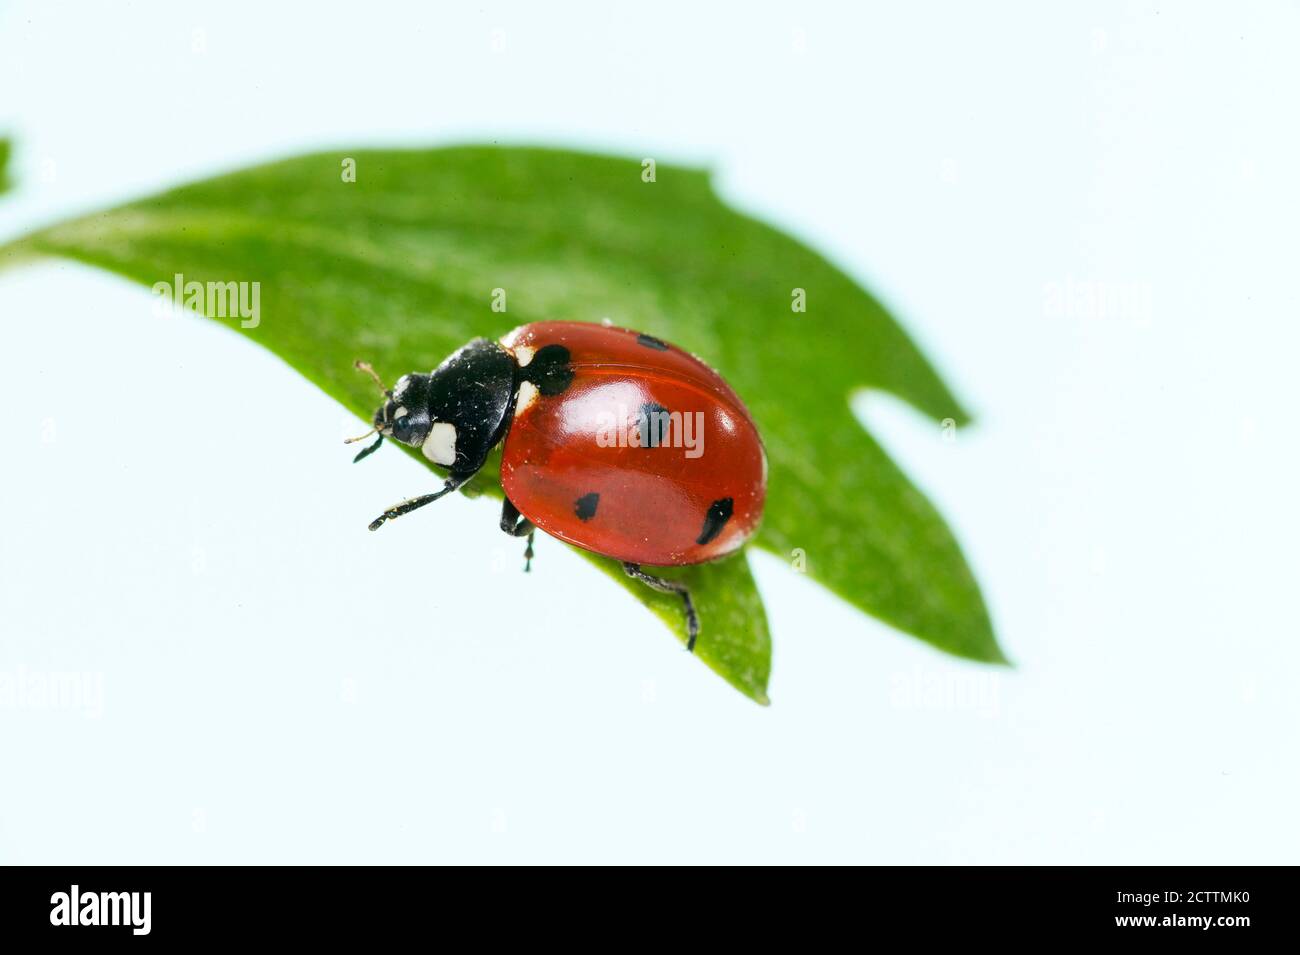 Seven-spot Ladybird, Sevenspot Ladybird, 7-spot Ladybird (Coccinella septempunctata) on a leaf. Studio picture against a white background. Stock Photo